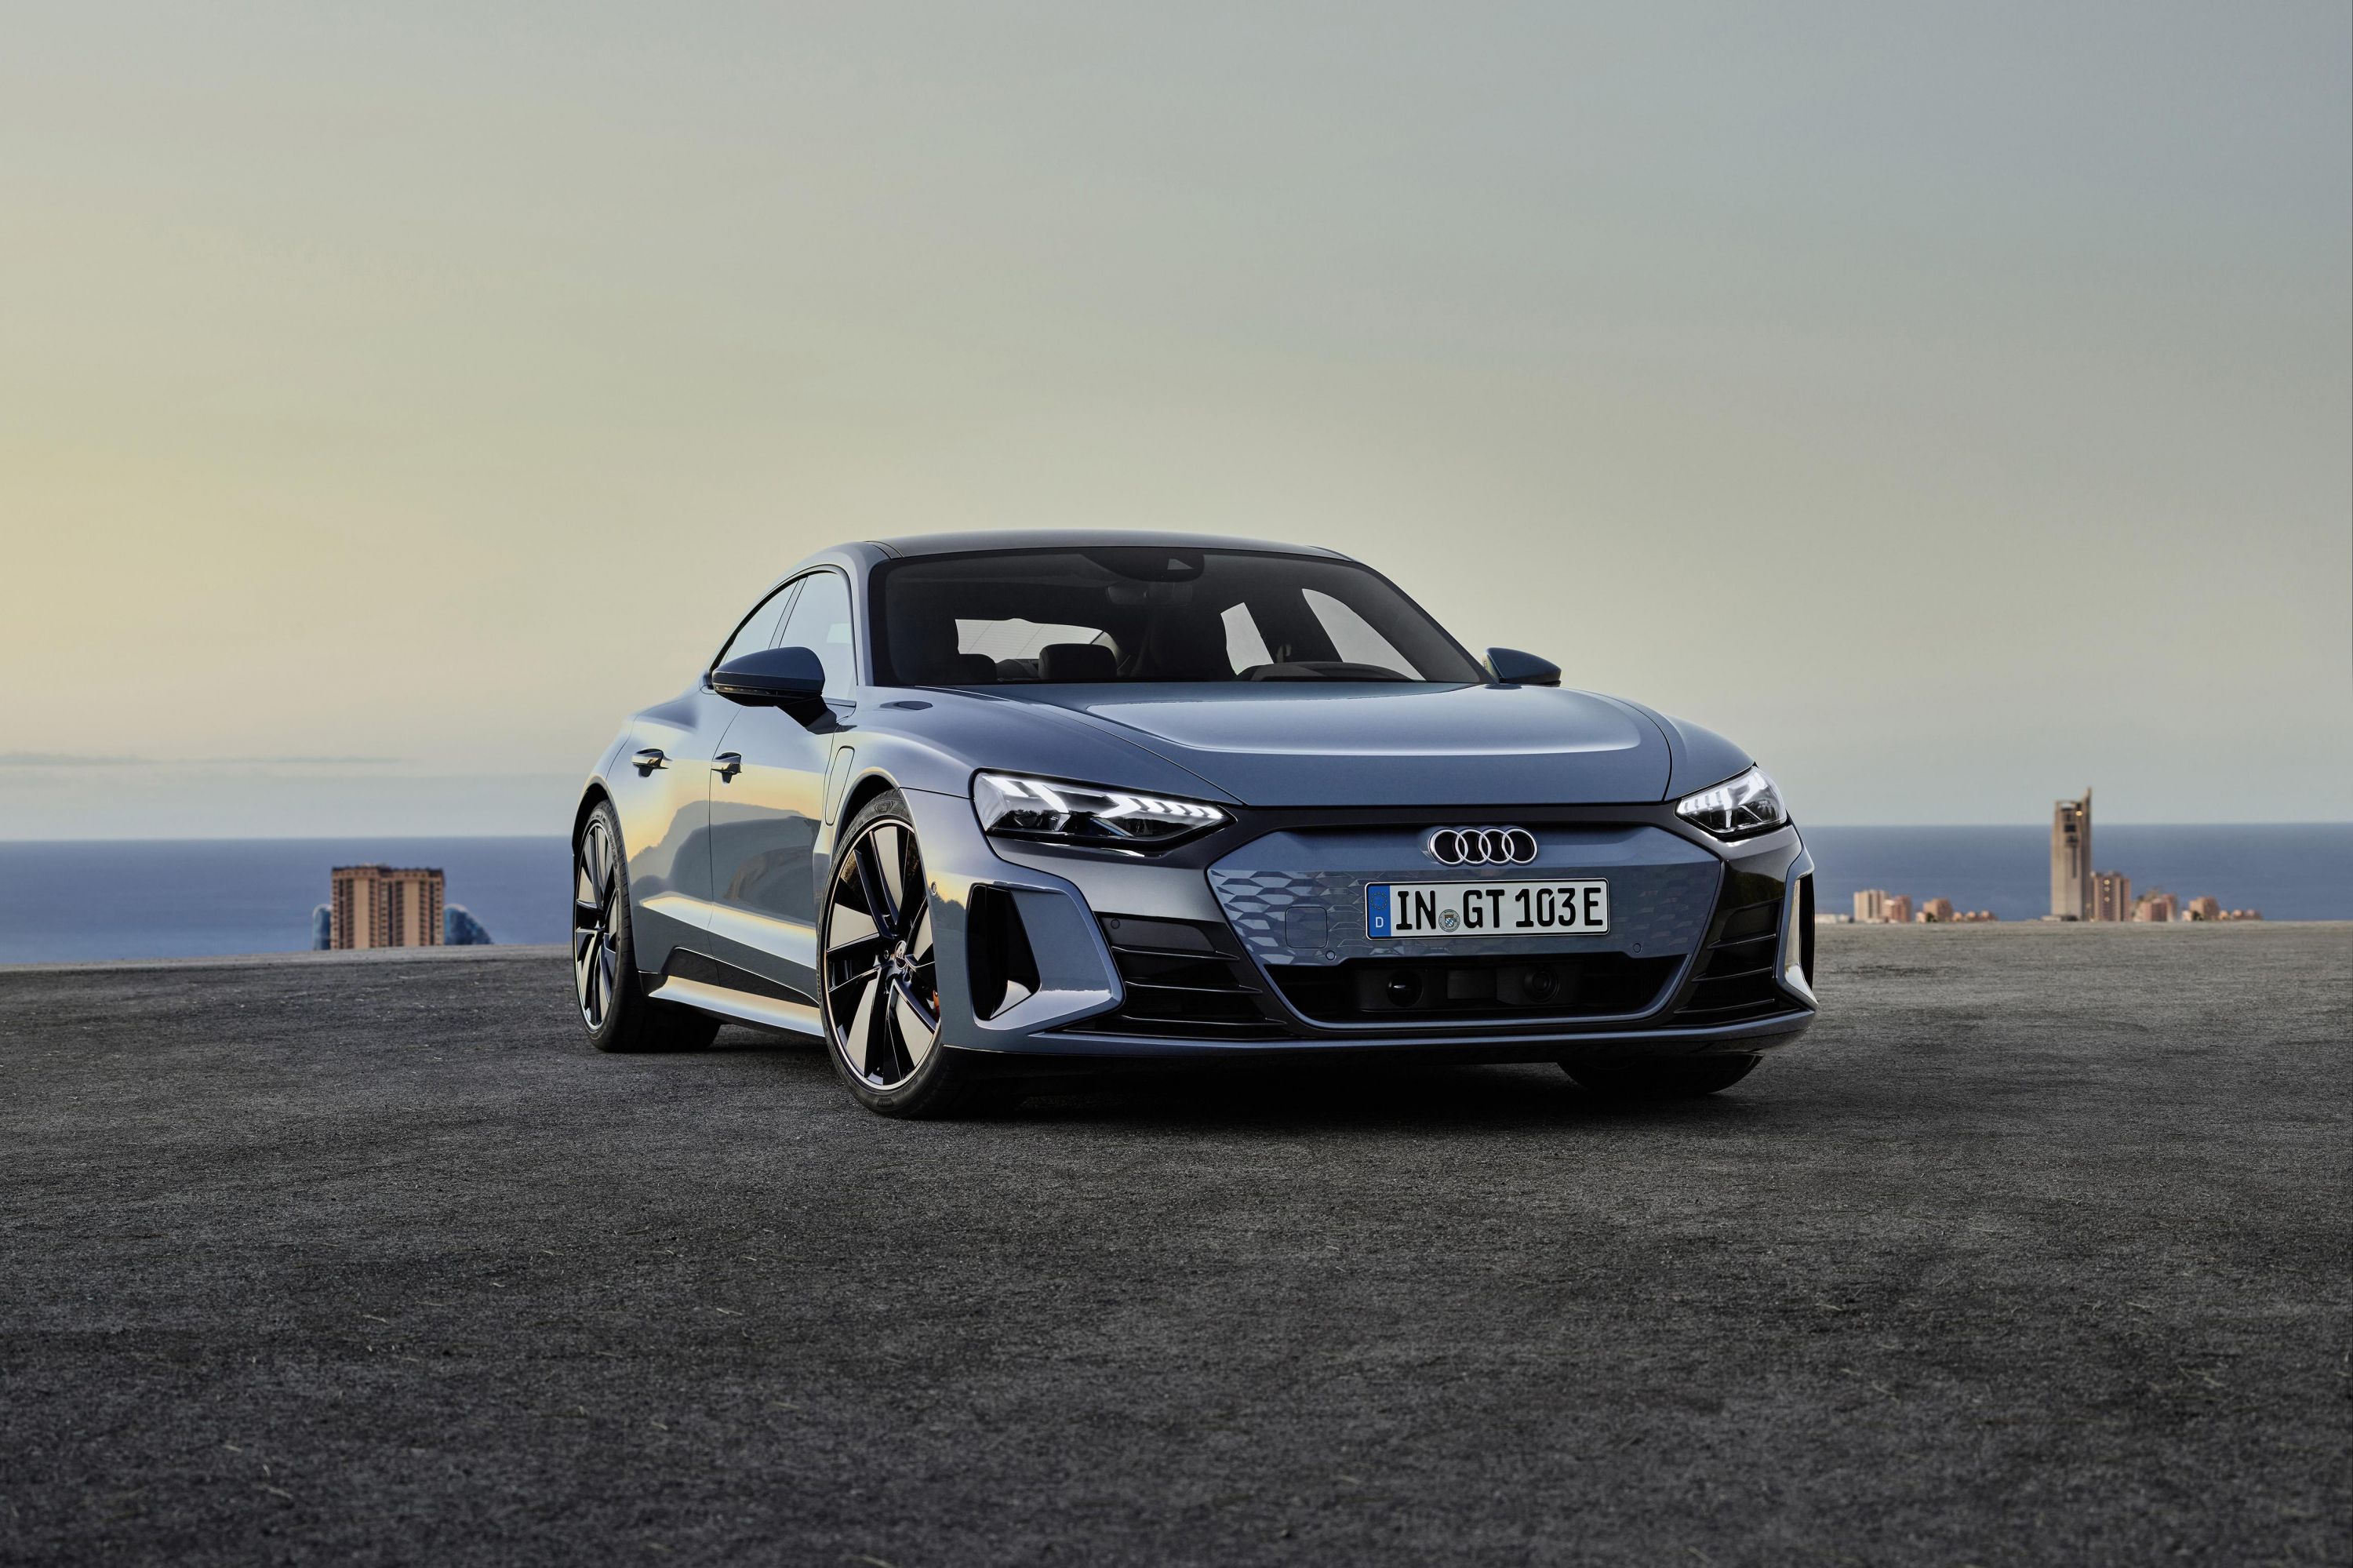 2022 Audi E-Tron GT and RS E-Tron GT price and features for Australia